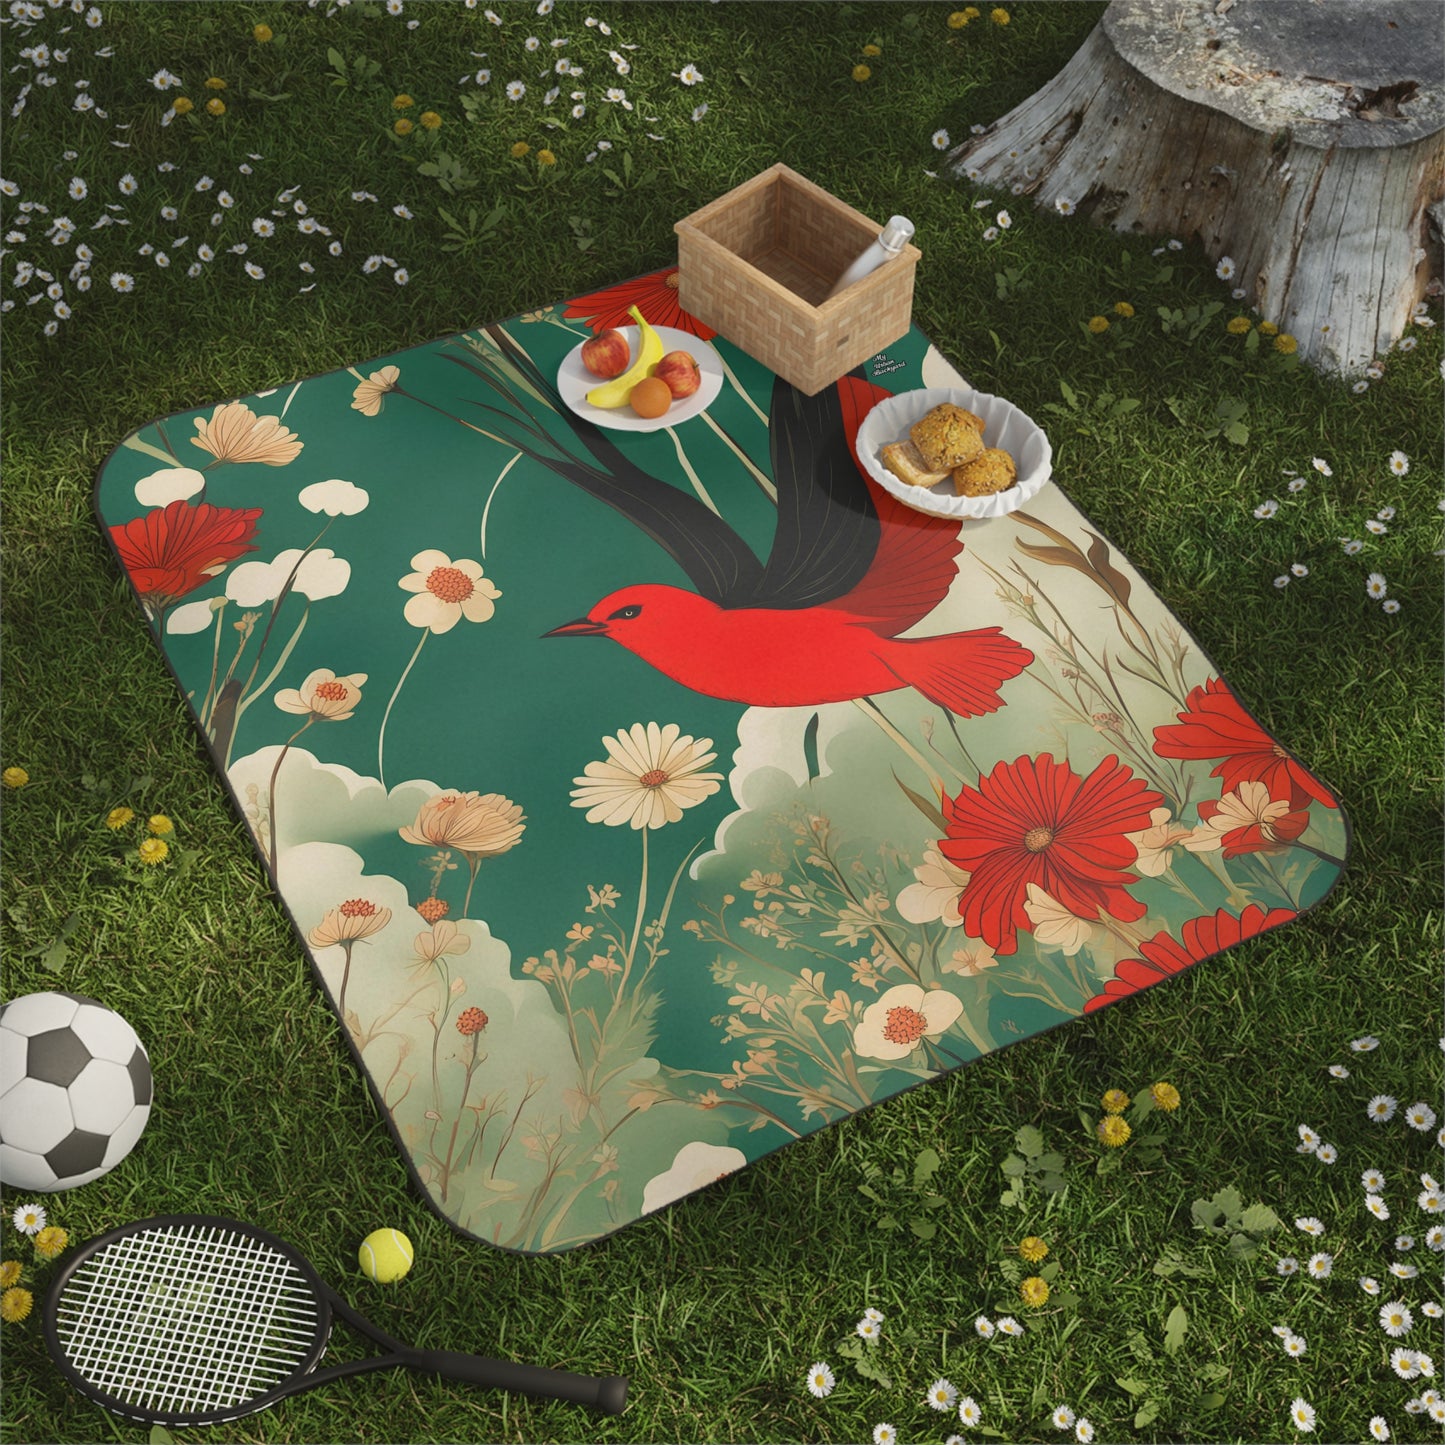 Outdoor Picnic Blanket with Soft Fleece Top and Water-Resistant Bottom - Red Bird